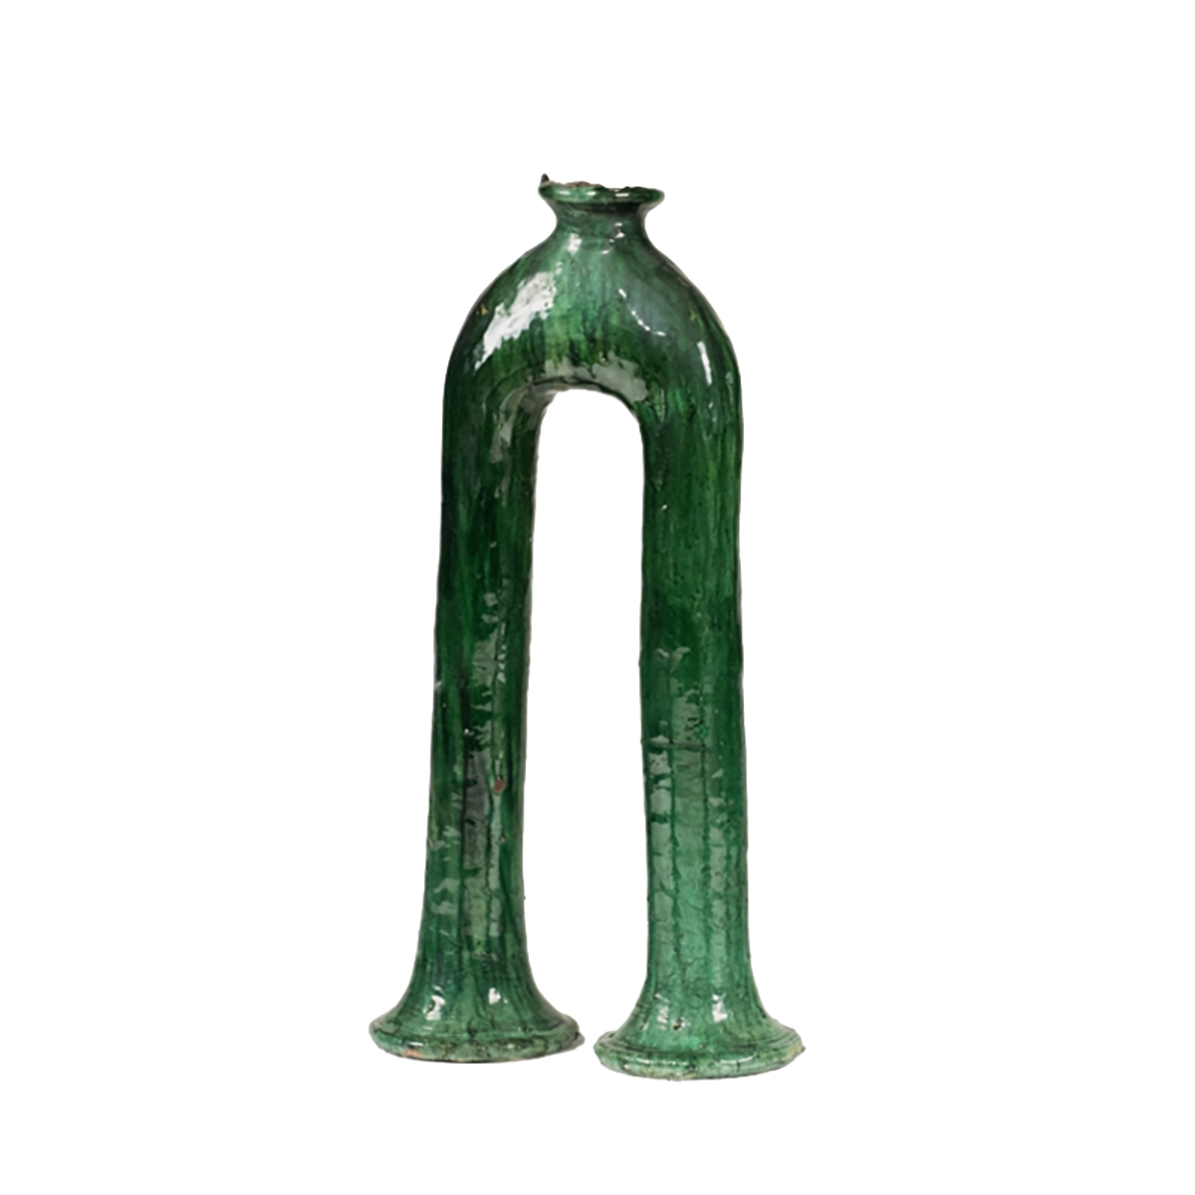 TAMEGROUTE GREEN CANDLE HOLDER